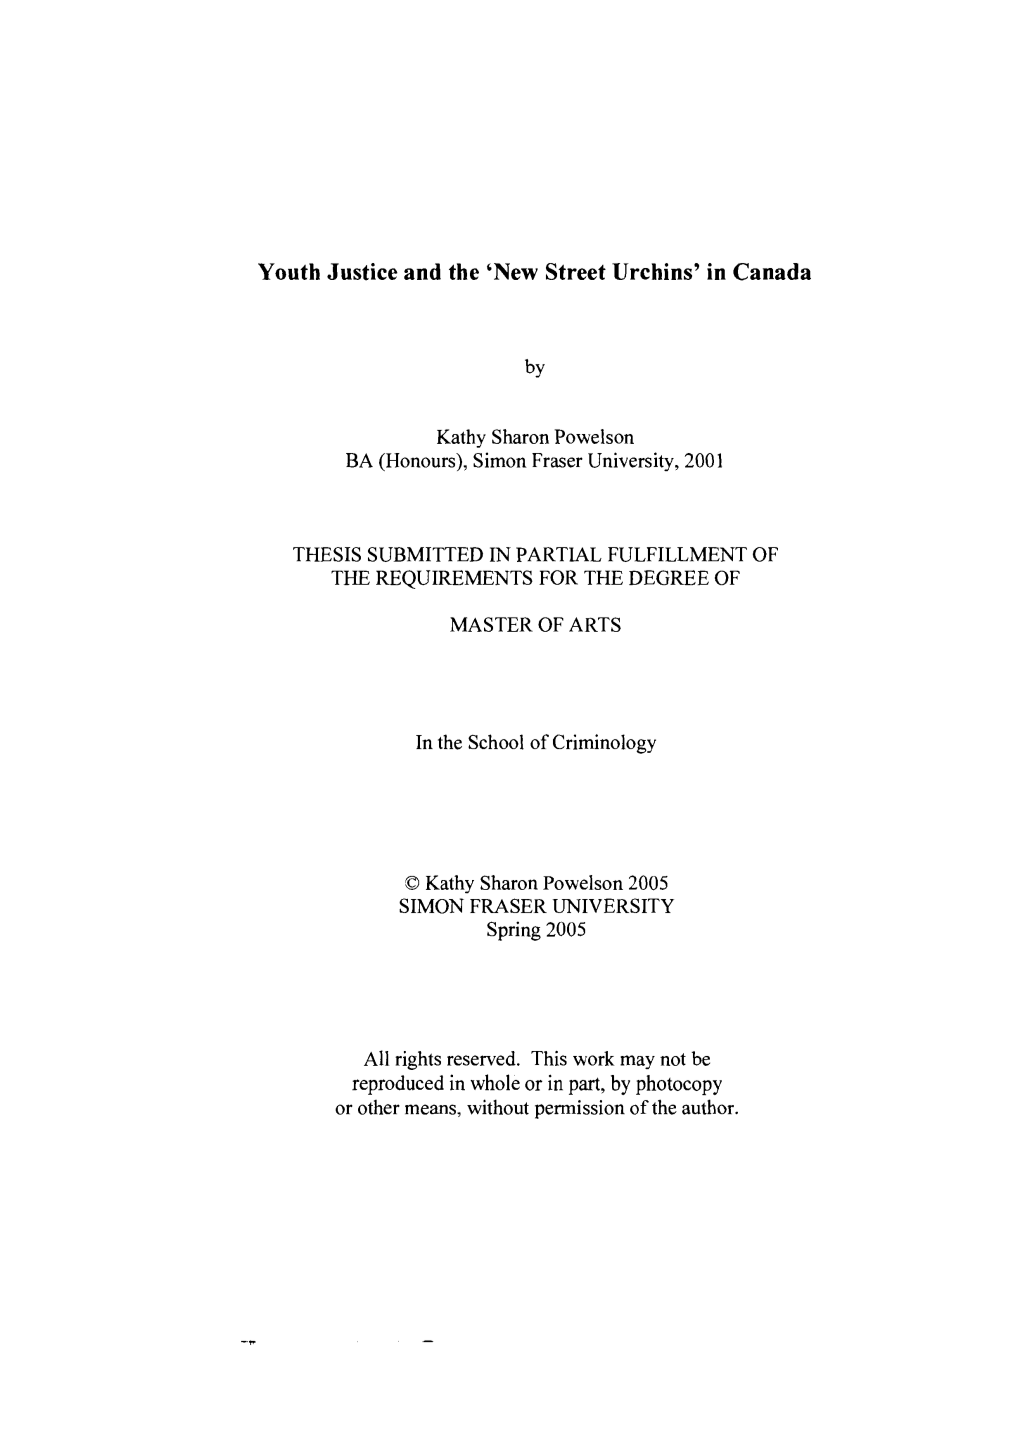 Youth Justice and the 'New Street Urchins' in Canada